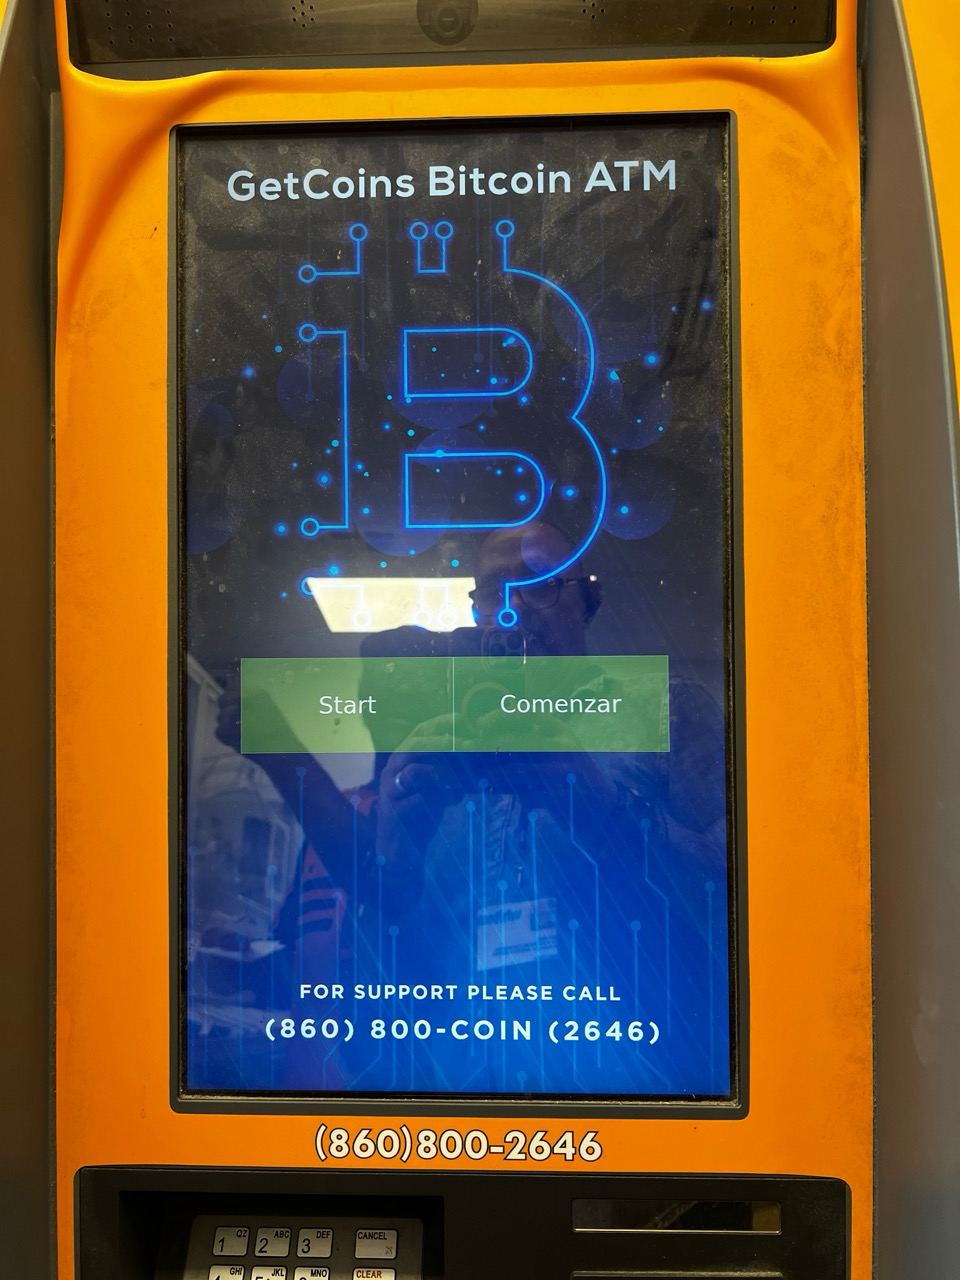 Getcoins - Bitcoin ATM - Inside of Gmt Market in Miami, Florida